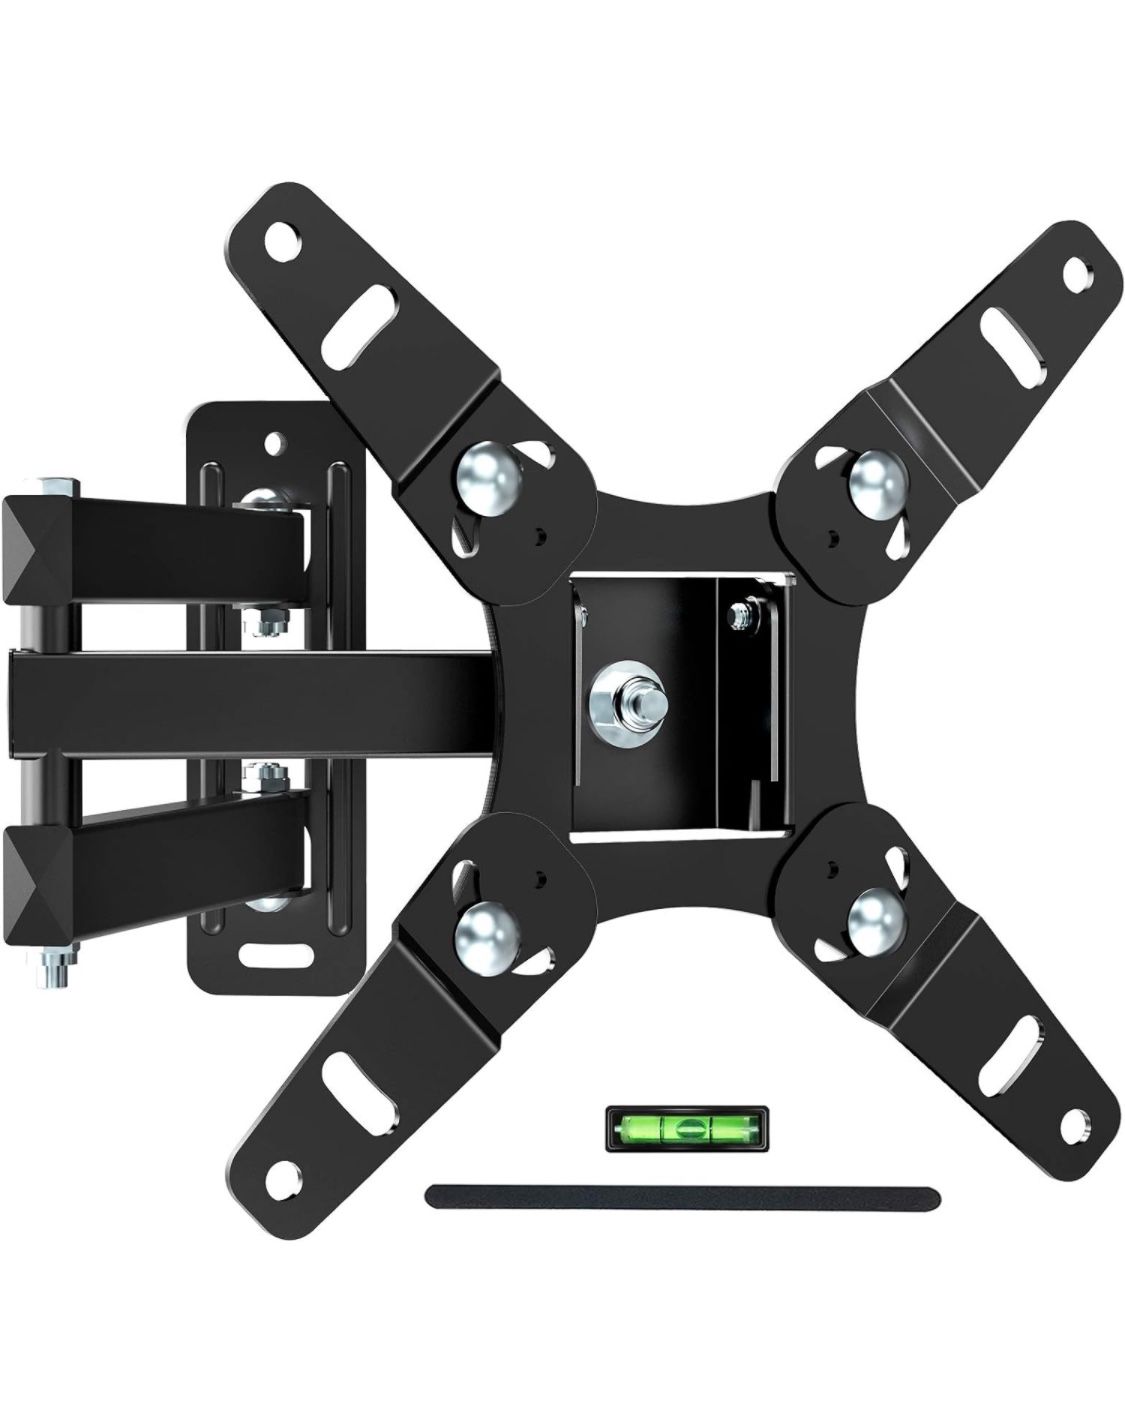 Full Motion TV Wall Mount Bracket Articulating Arms Swivels Tilts Extension Rotation for Most 13-42 Inch LED LCD Flat Curved Screen TVs & Monitors,Fit